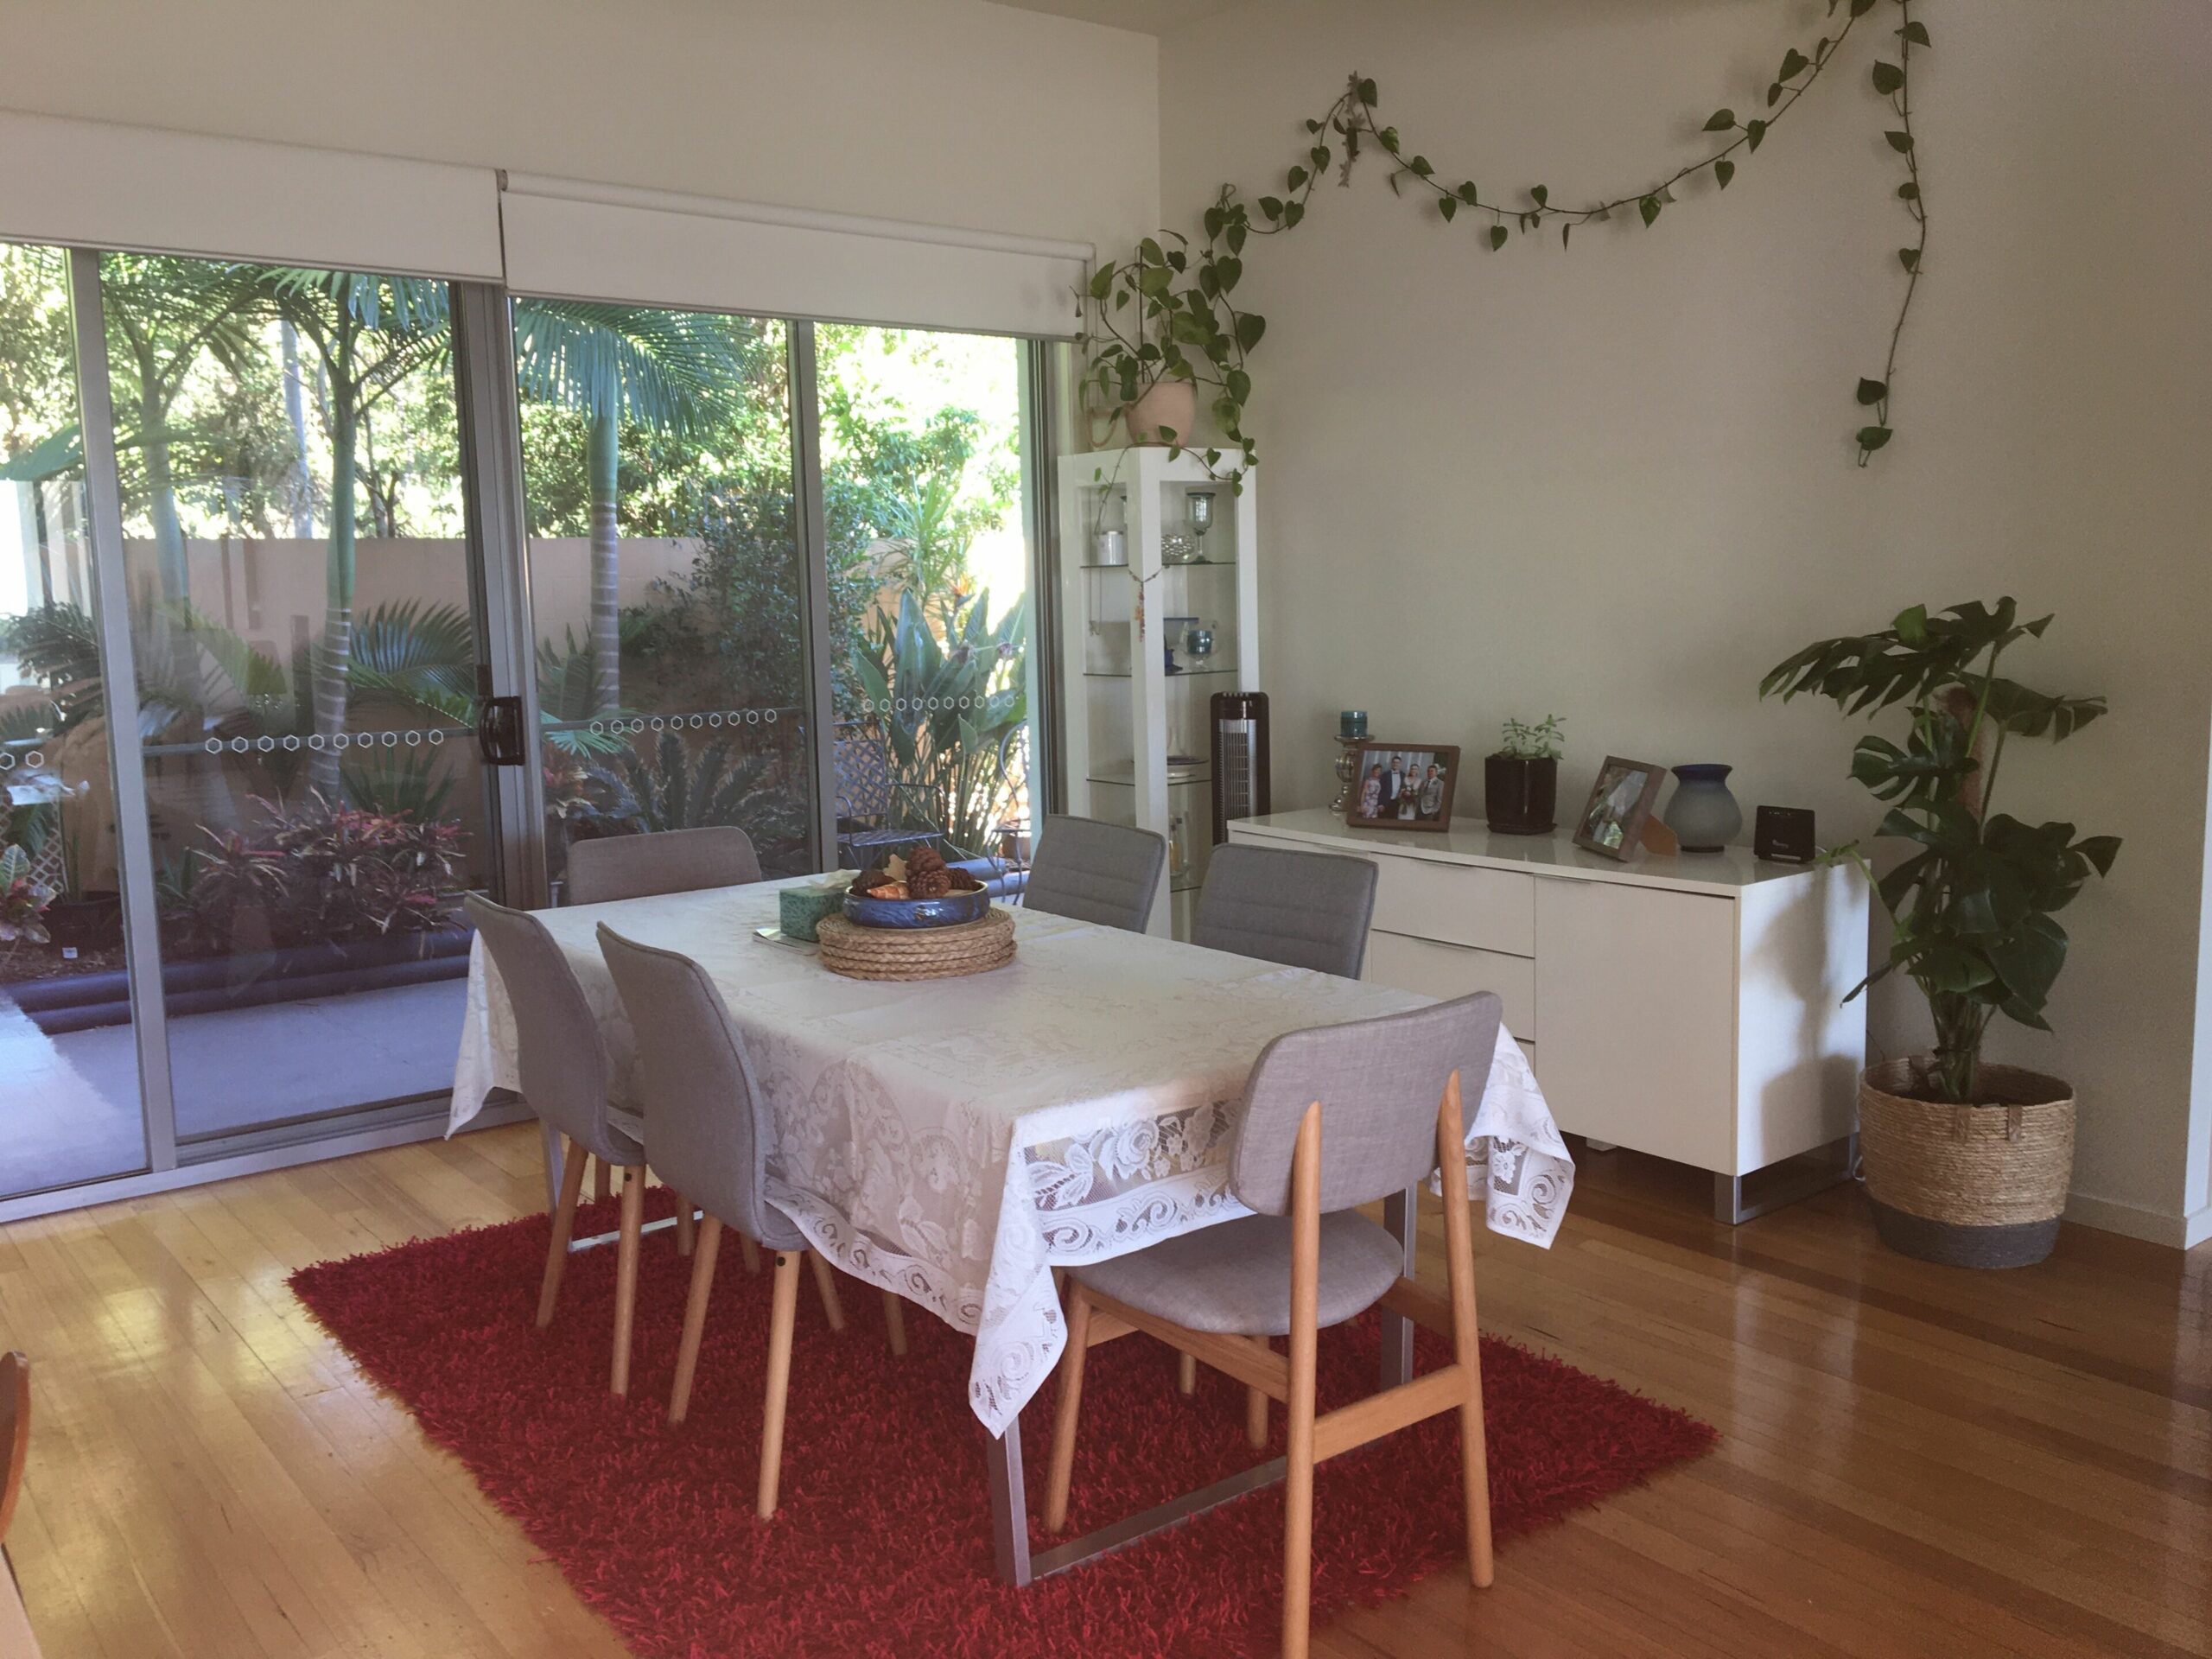 Family holiday right near Diggers Beach and shops. Light filled spacious home.